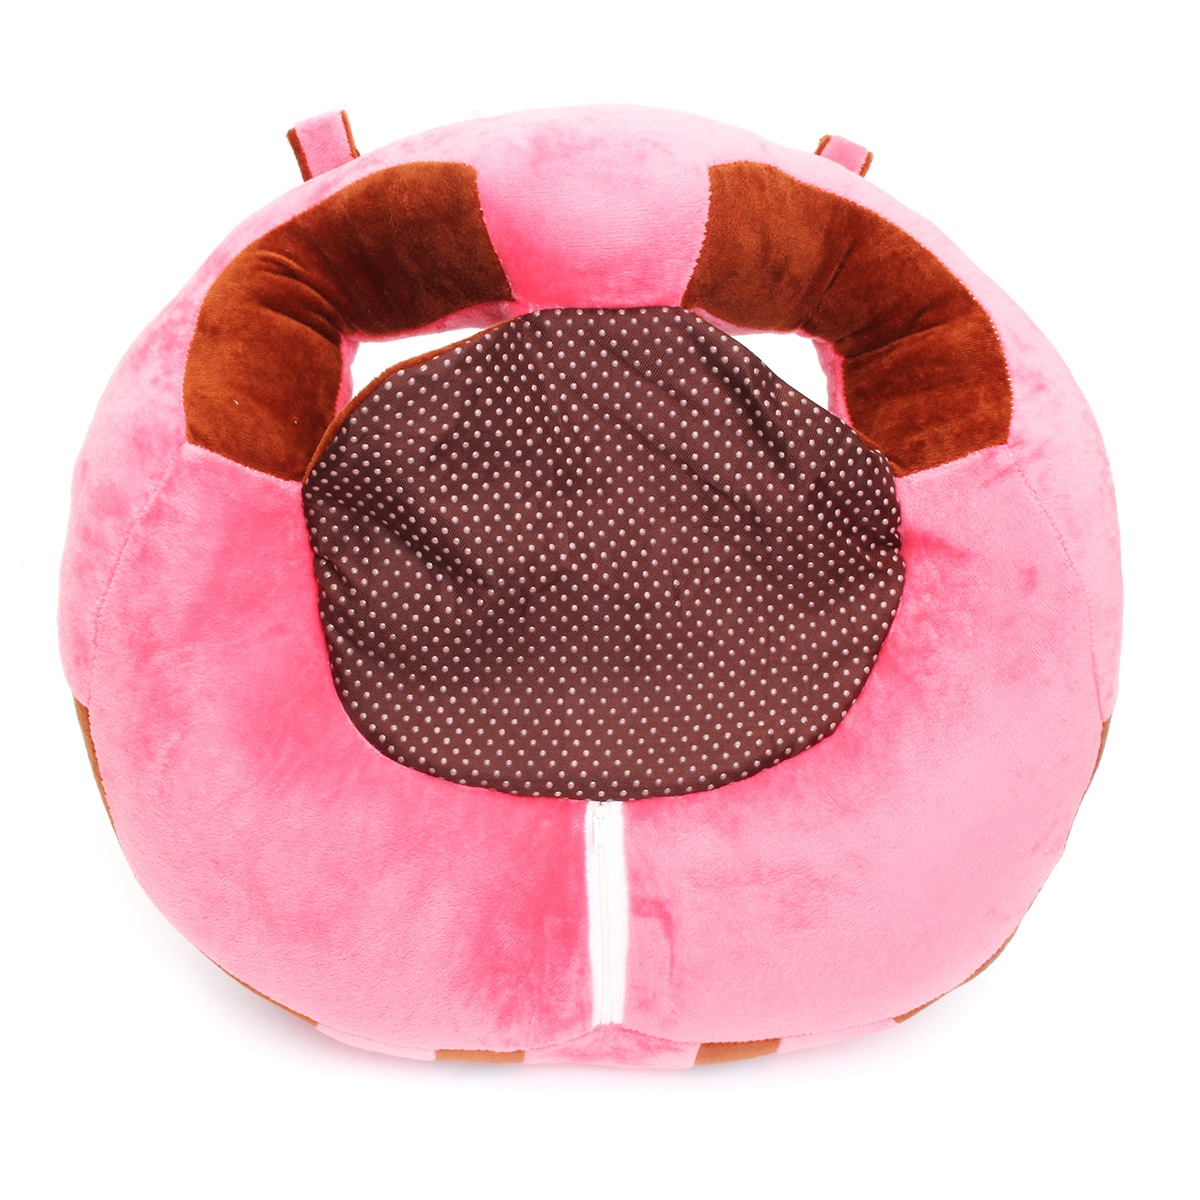 Baby-Sofa-Support-Seat-Nursing-Pillow-Safety-Feeding-Cushion-Pad-Chair-Plush-Toy-1297318